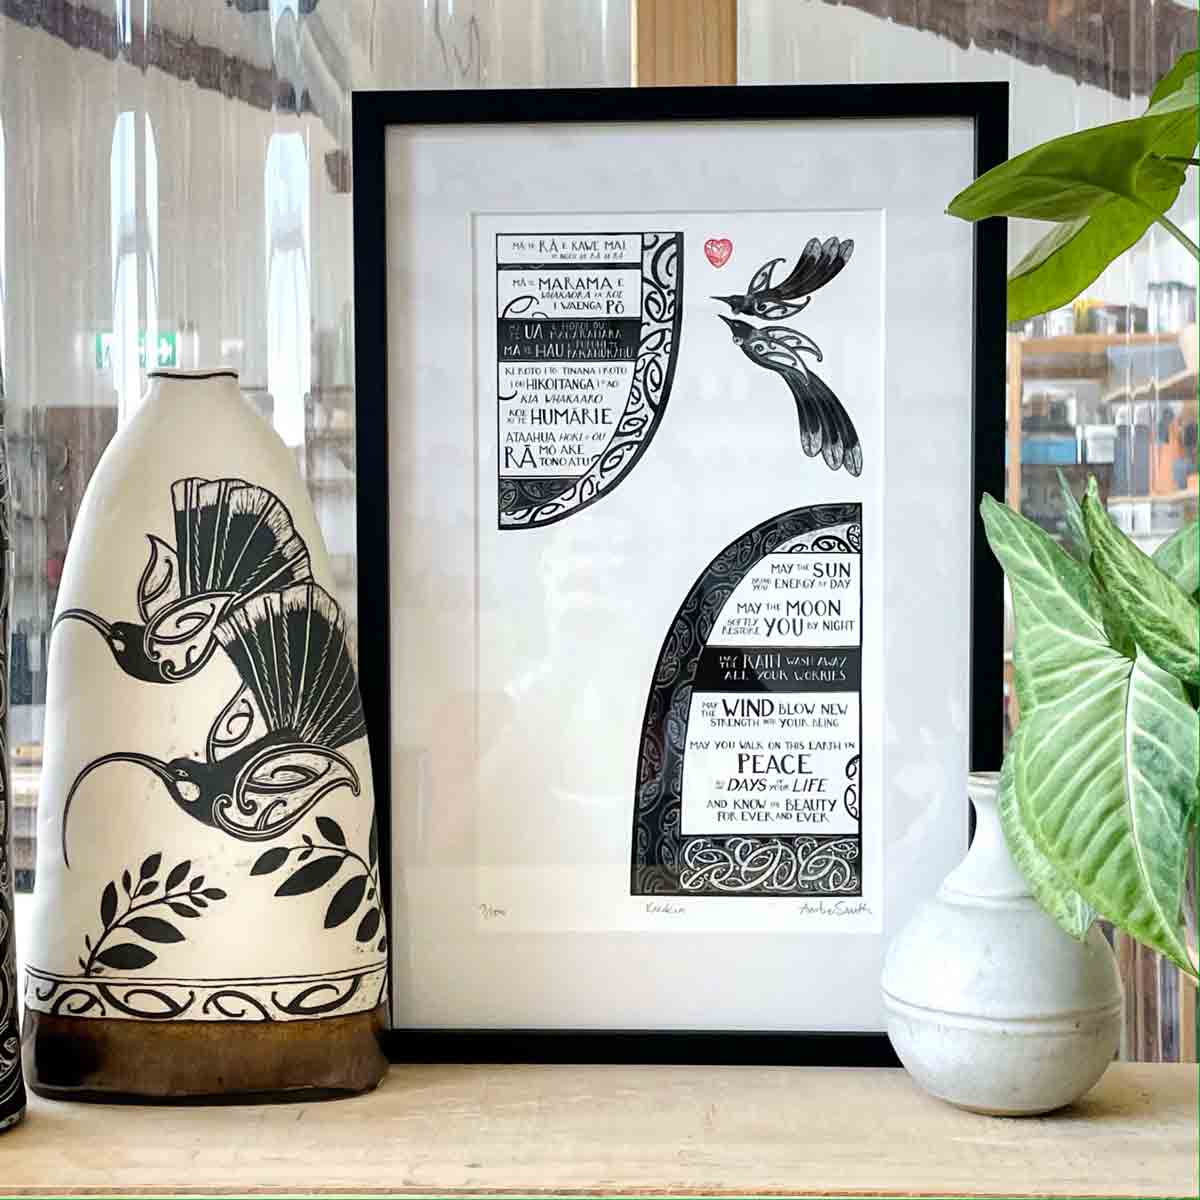 framed favourite nz art print with maori art tui and blessing may the sun bring you energy by day by nz artist amber smith